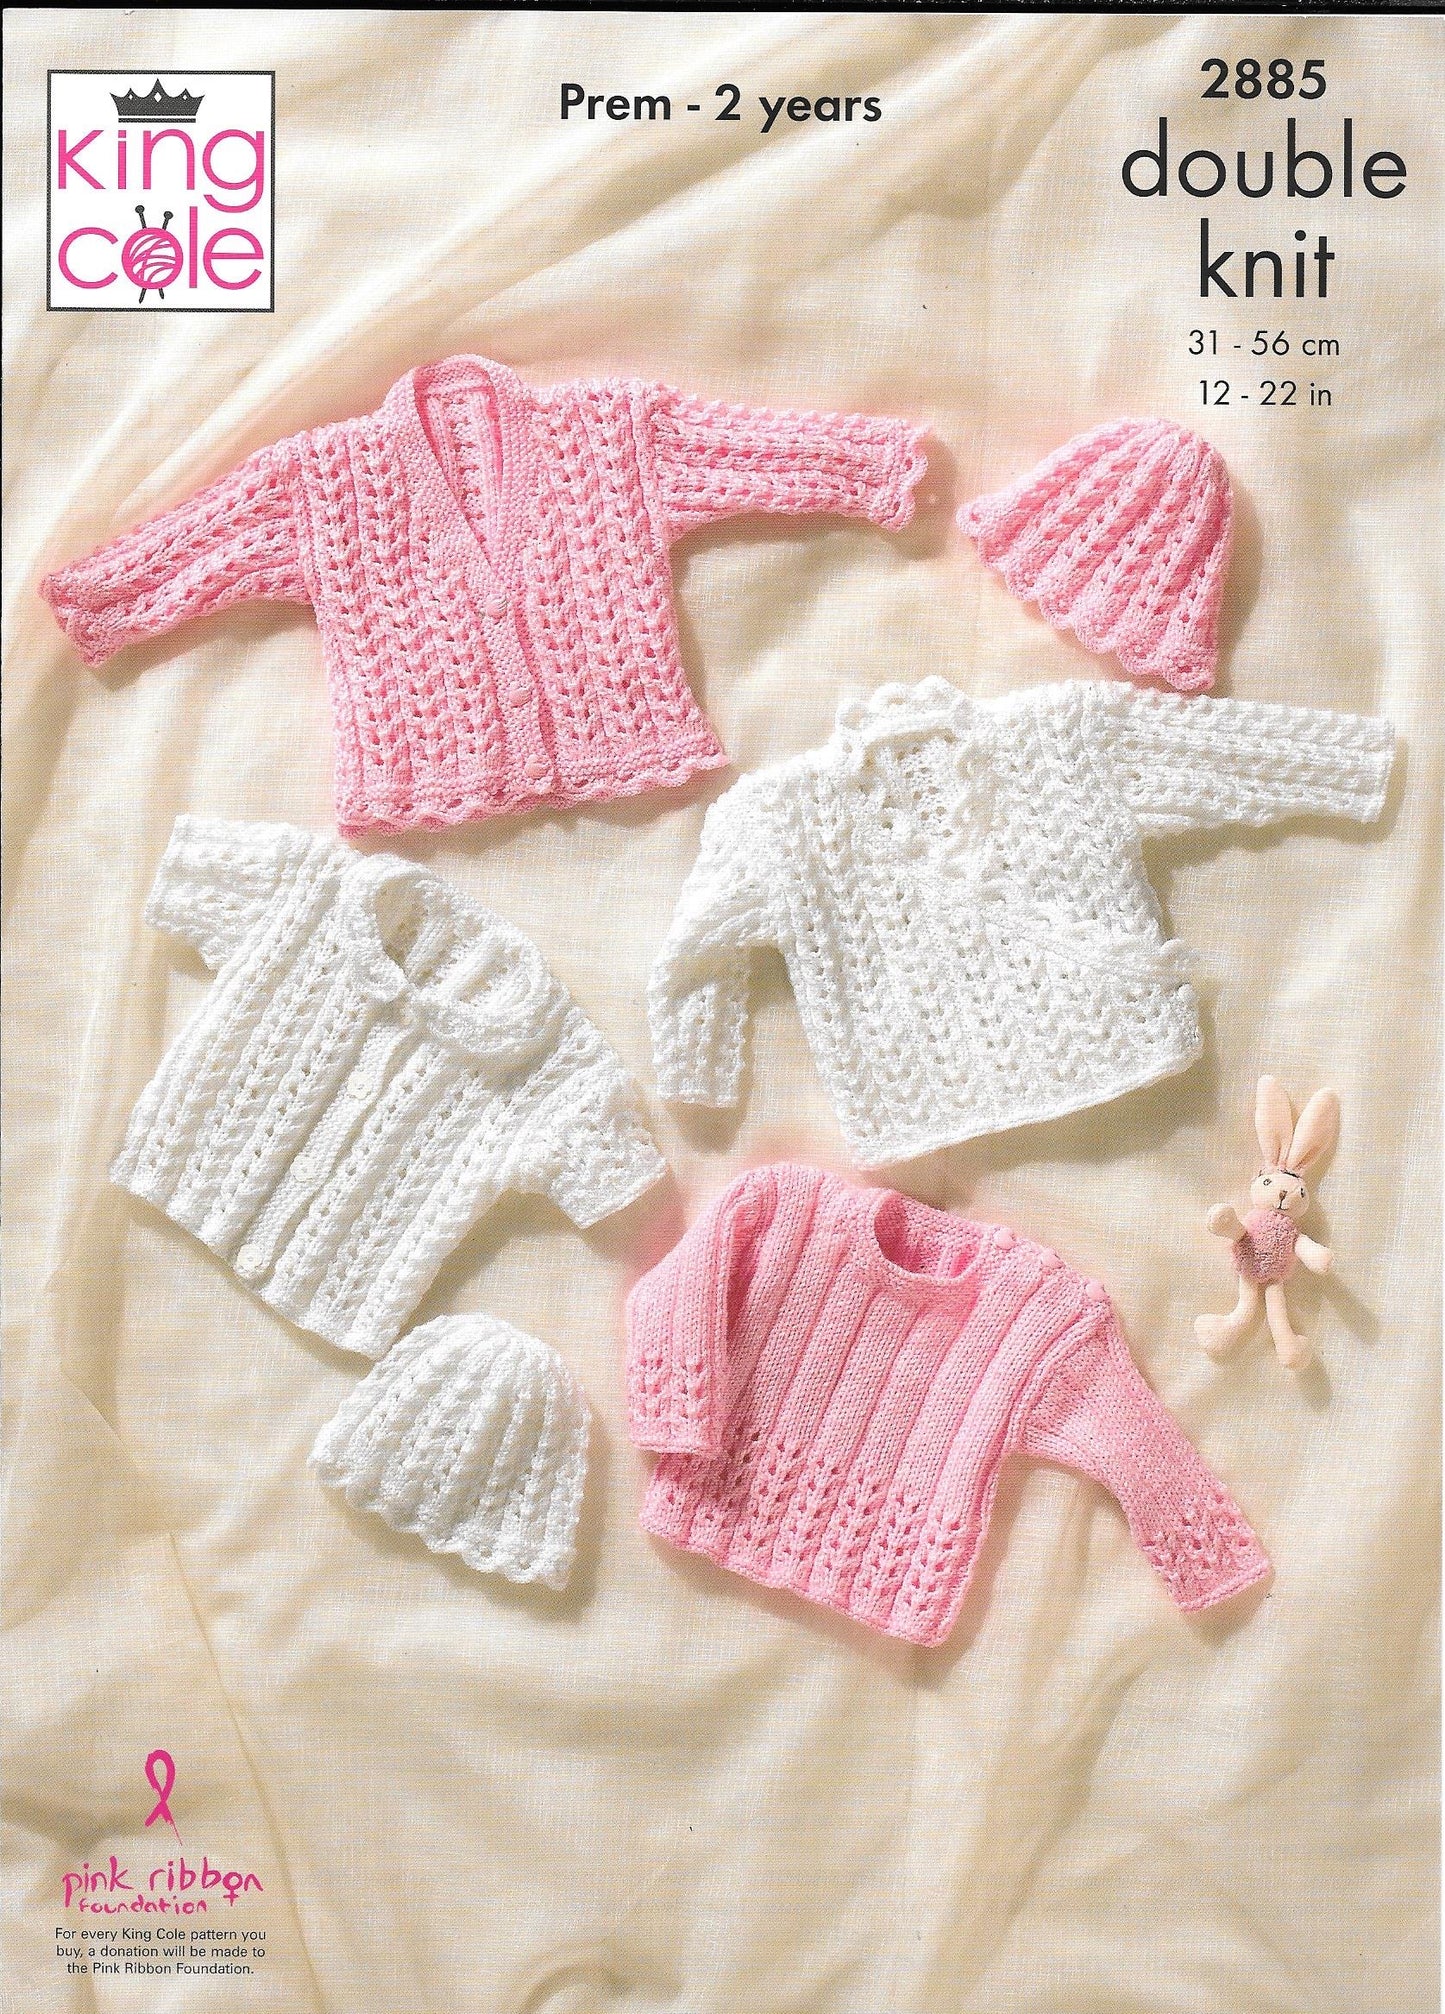 2885 King Cole DK Baby, Child V-neck, Round neck Cardigans, Sweater, Crossover Cardigan and hat knitting pattern